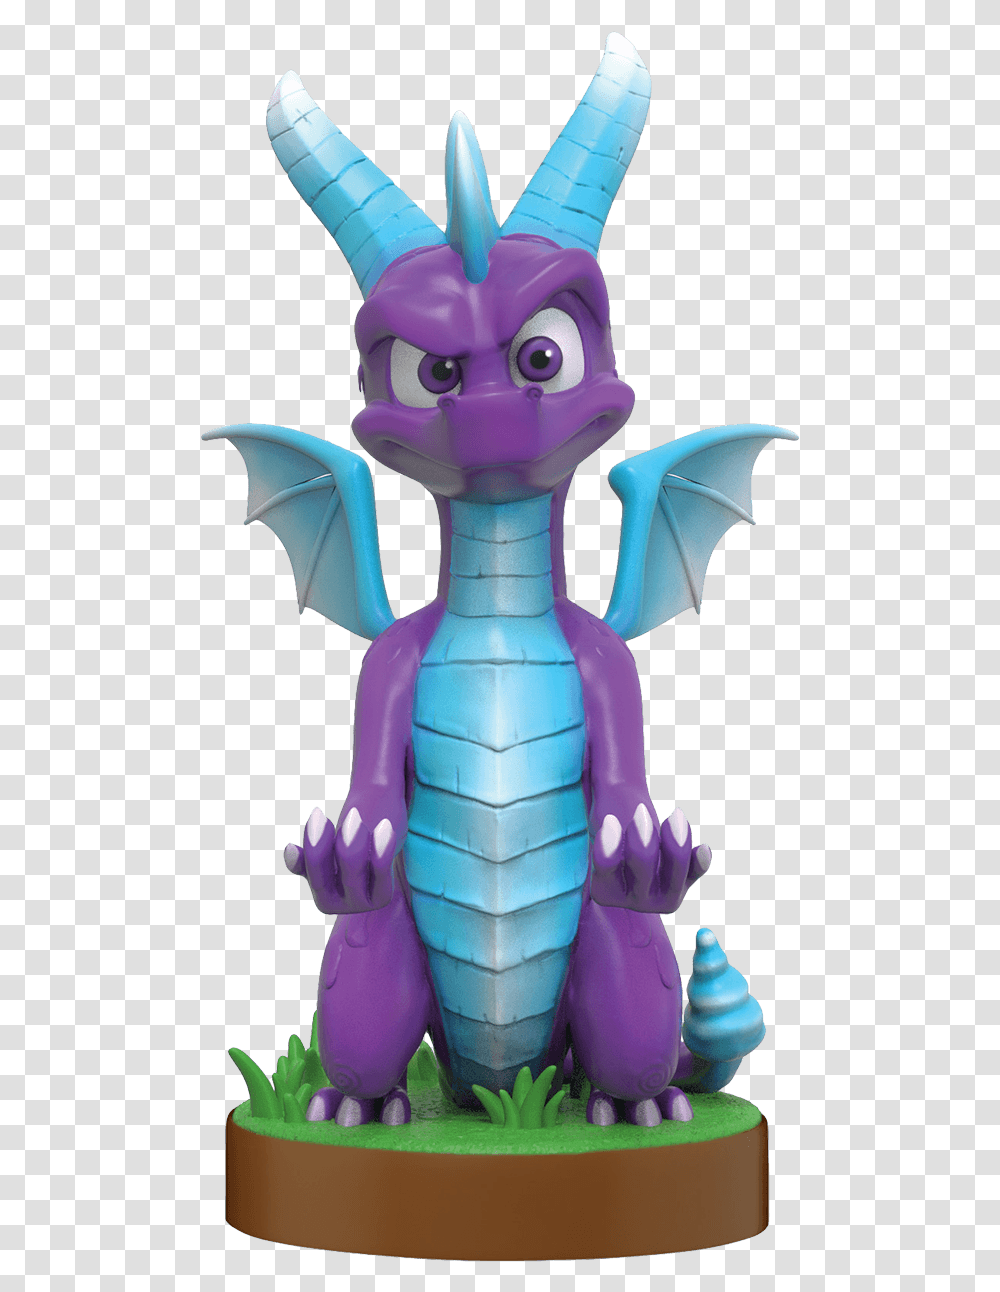 Cable Guys Phone & Controller Holder Spyro The Dragon Ice Spyro New Spyro Cable Guy, Toy, Figurine, Alien, Robot Transparent Png